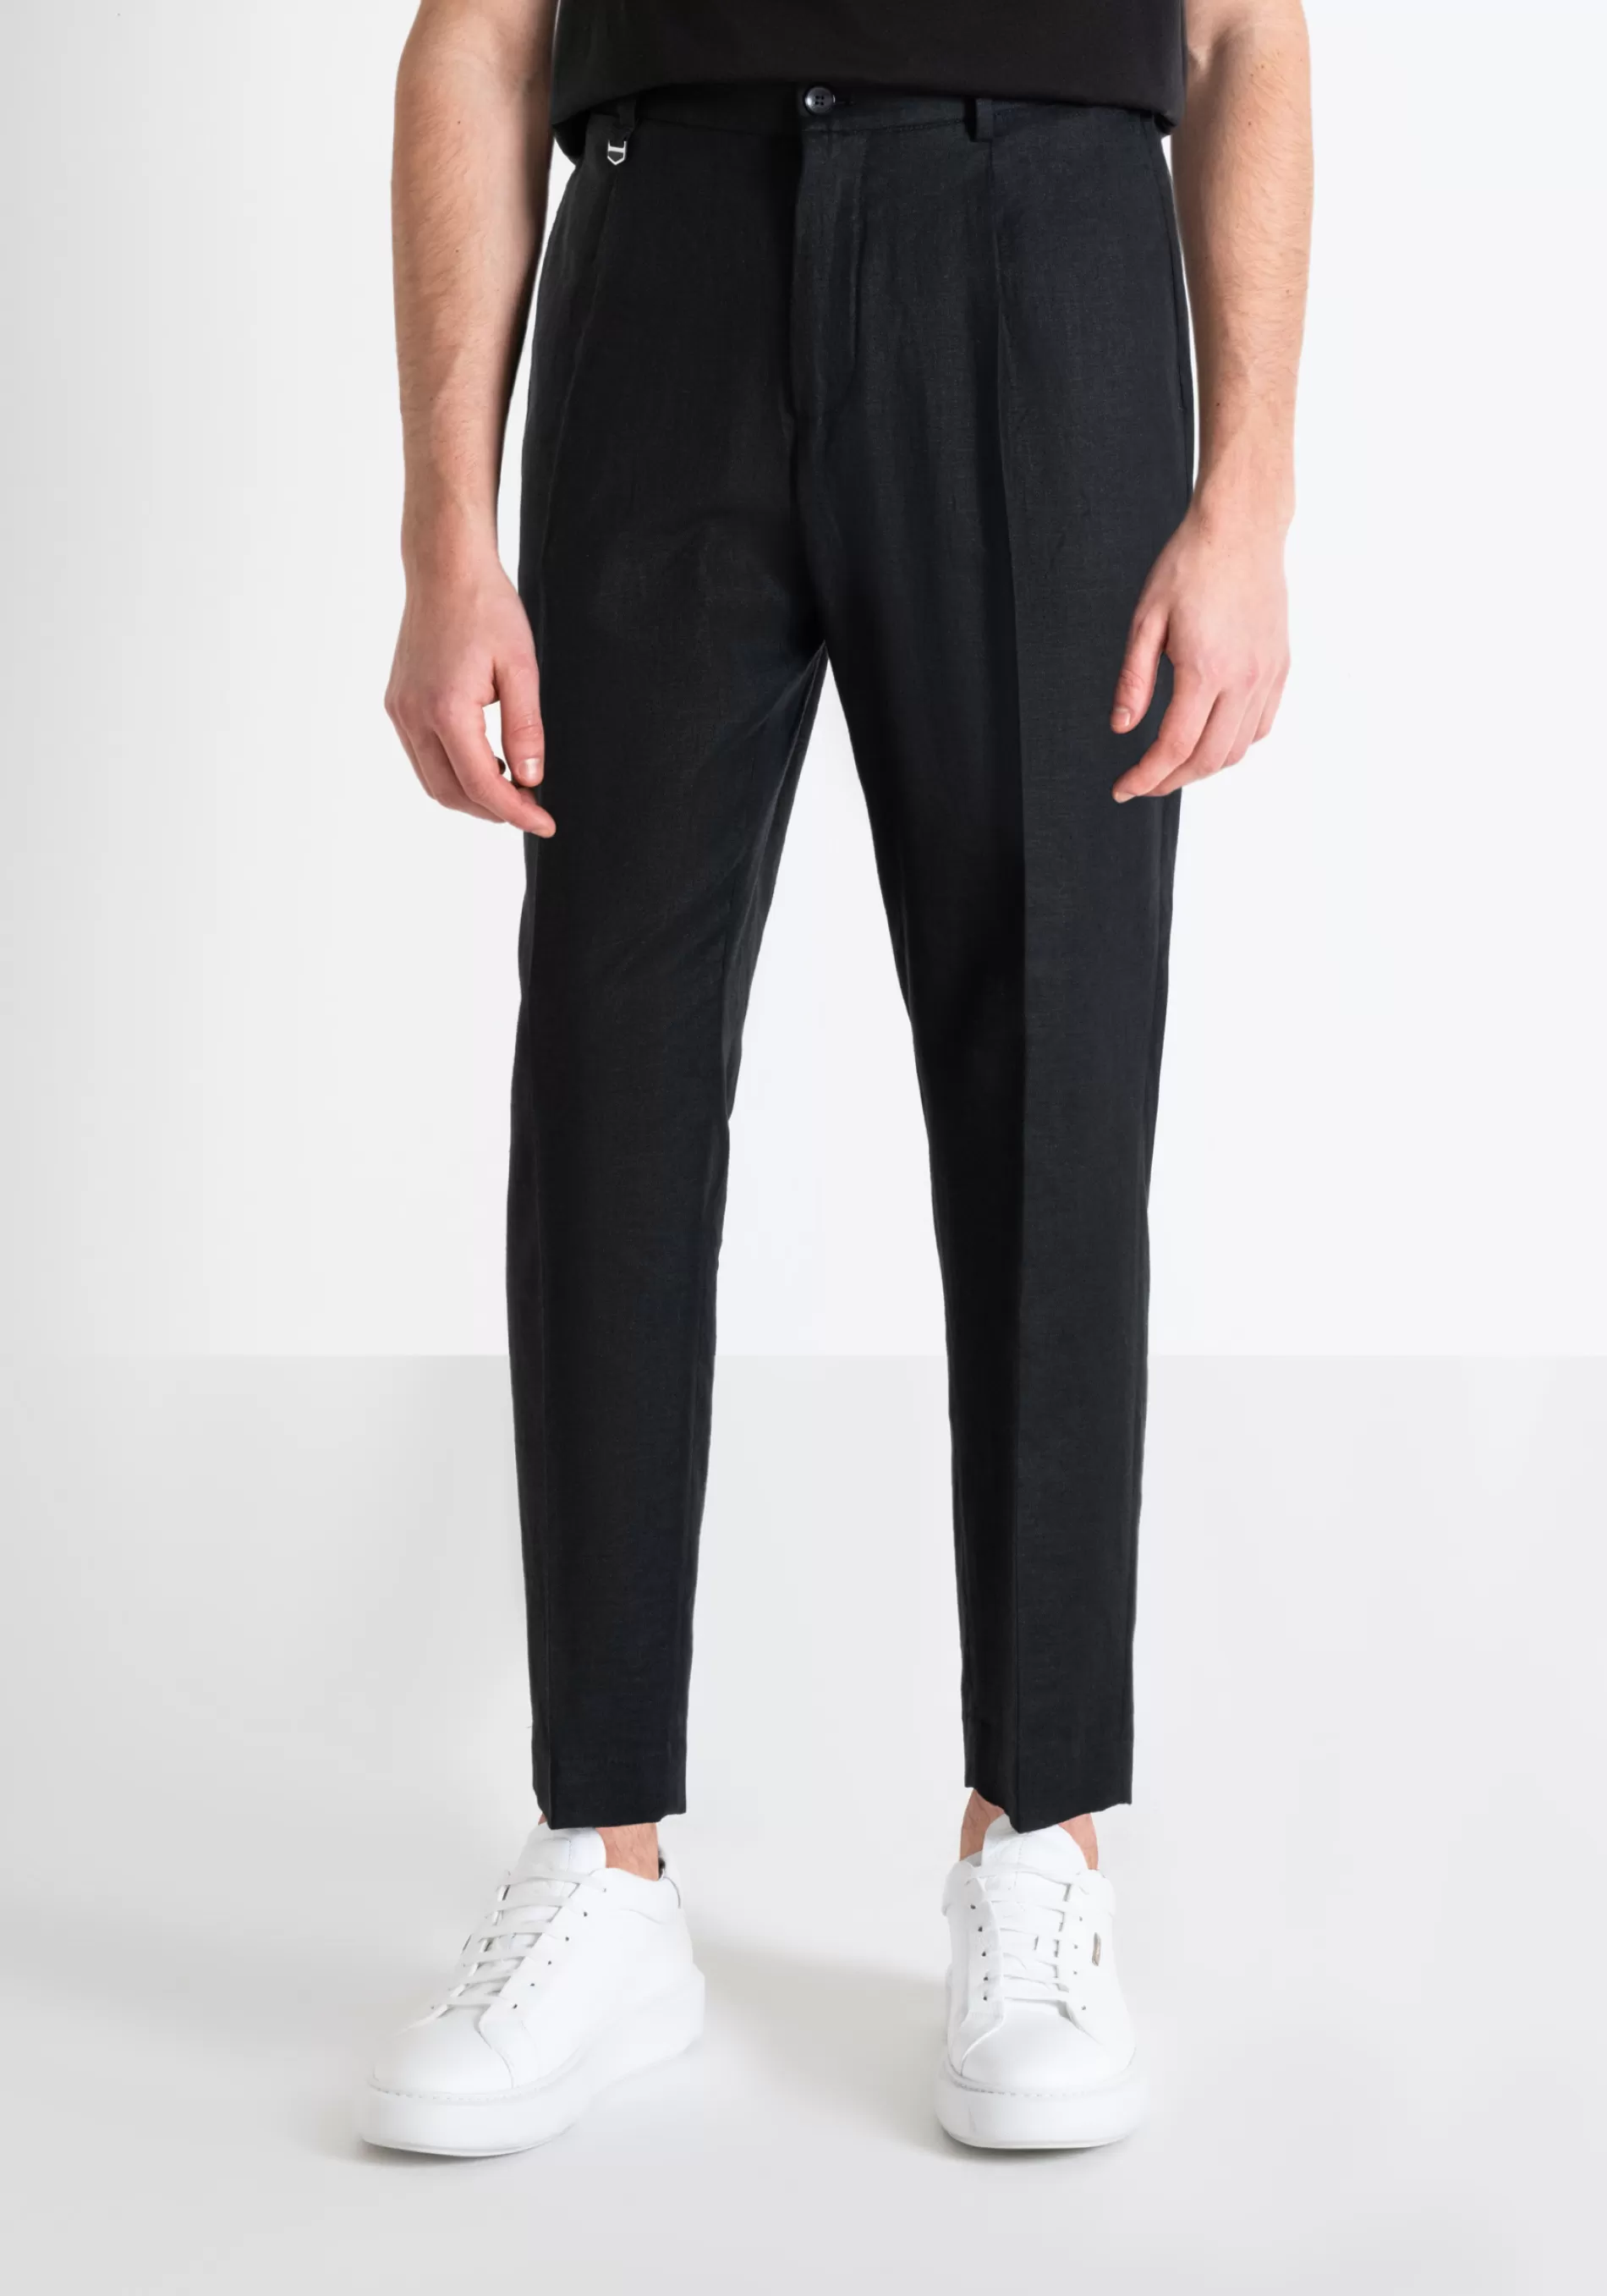 Best "GUSTAF" CARROT FIT TROUSERS IN VISCOSE LINEN FABRIC Trousers